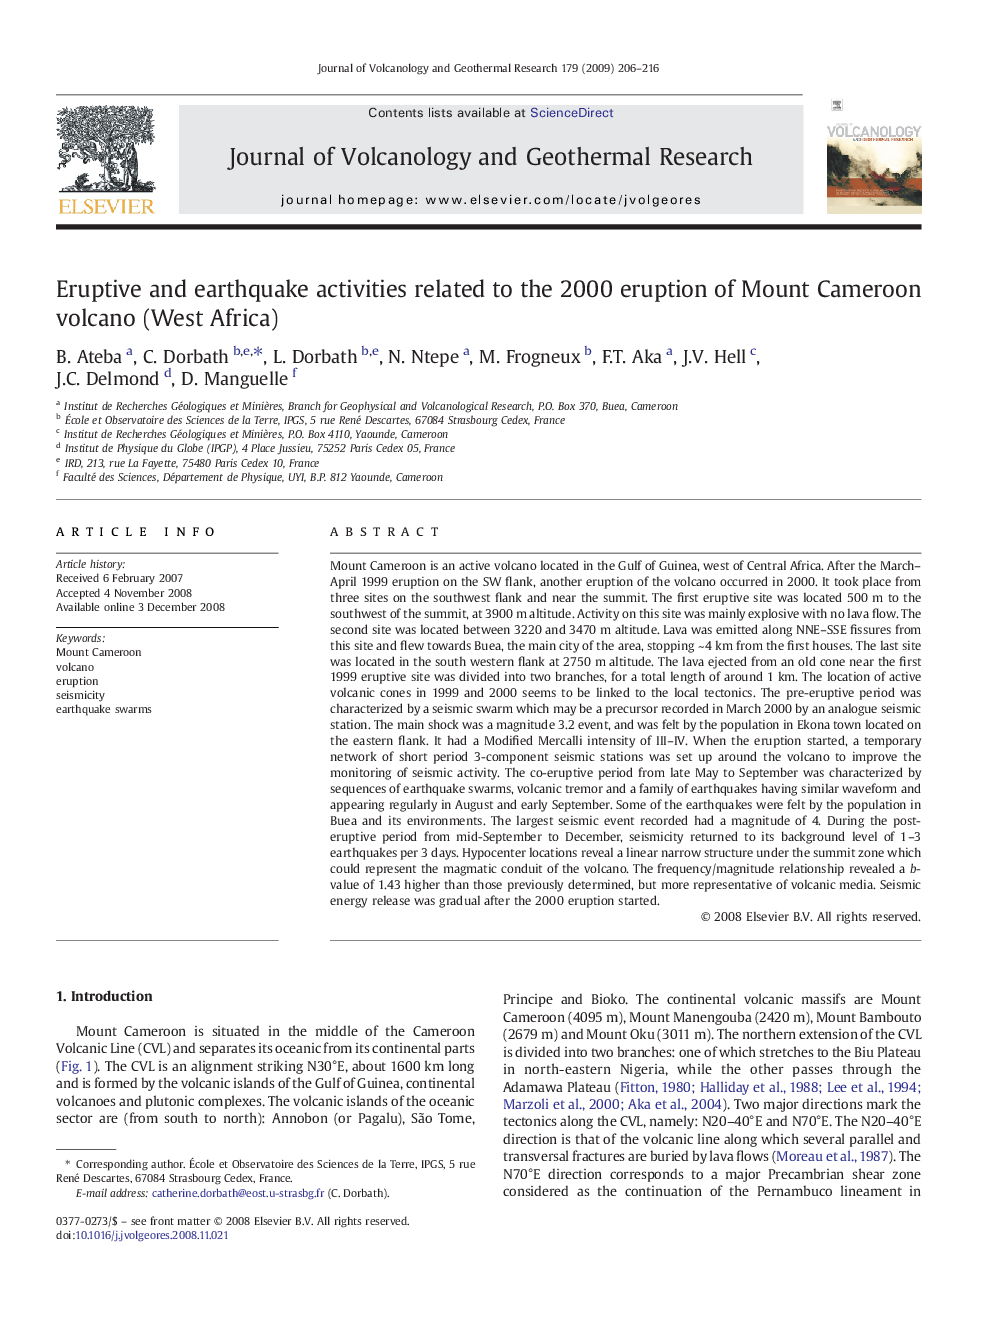 Eruptive and earthquake activities related to the 2000 eruption of Mount Cameroon volcano (West Africa)